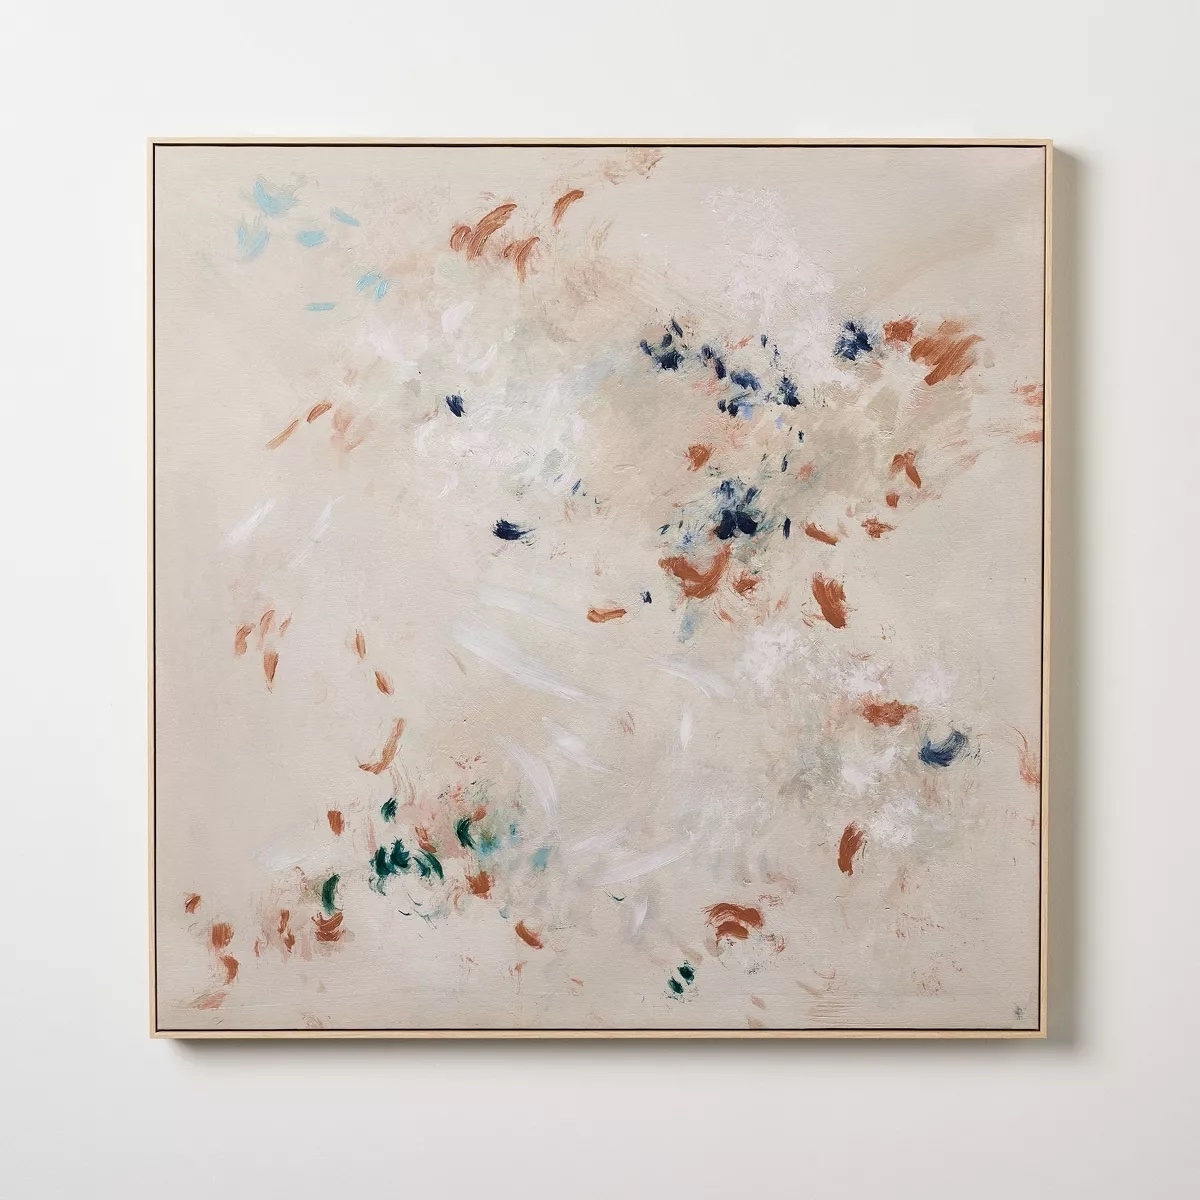 Abstract painting with textured brushstrokes, framed, suited for modern decor